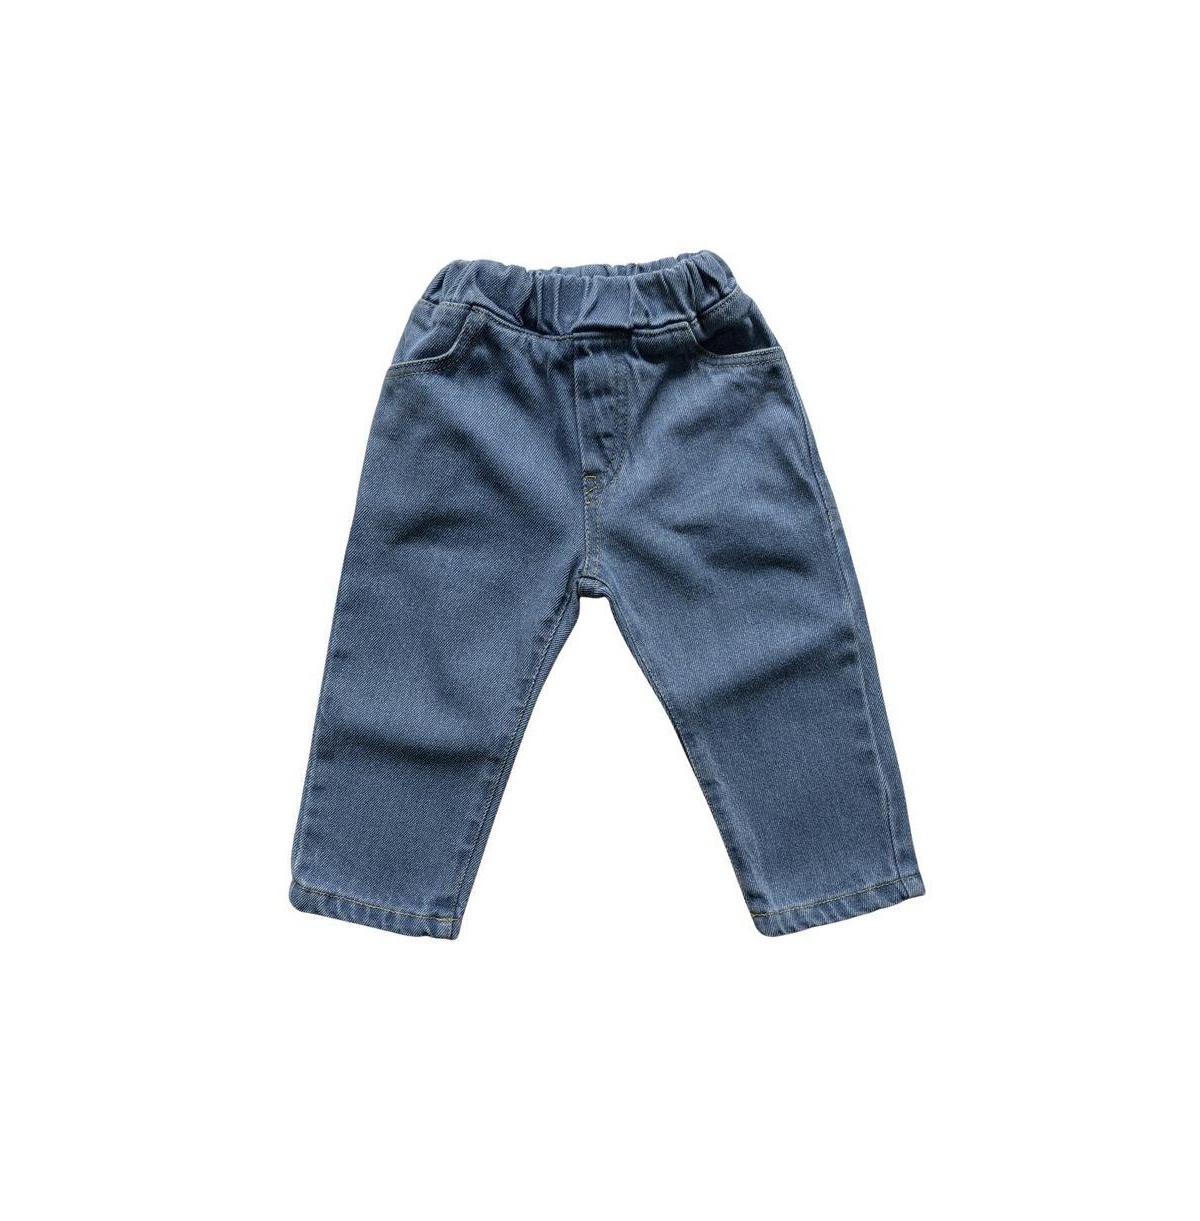 THE SIMPLE FOLK CHILD BOY AND CHILD GIRL VINTAGE-STYLE COTTON PERFECT JEAN